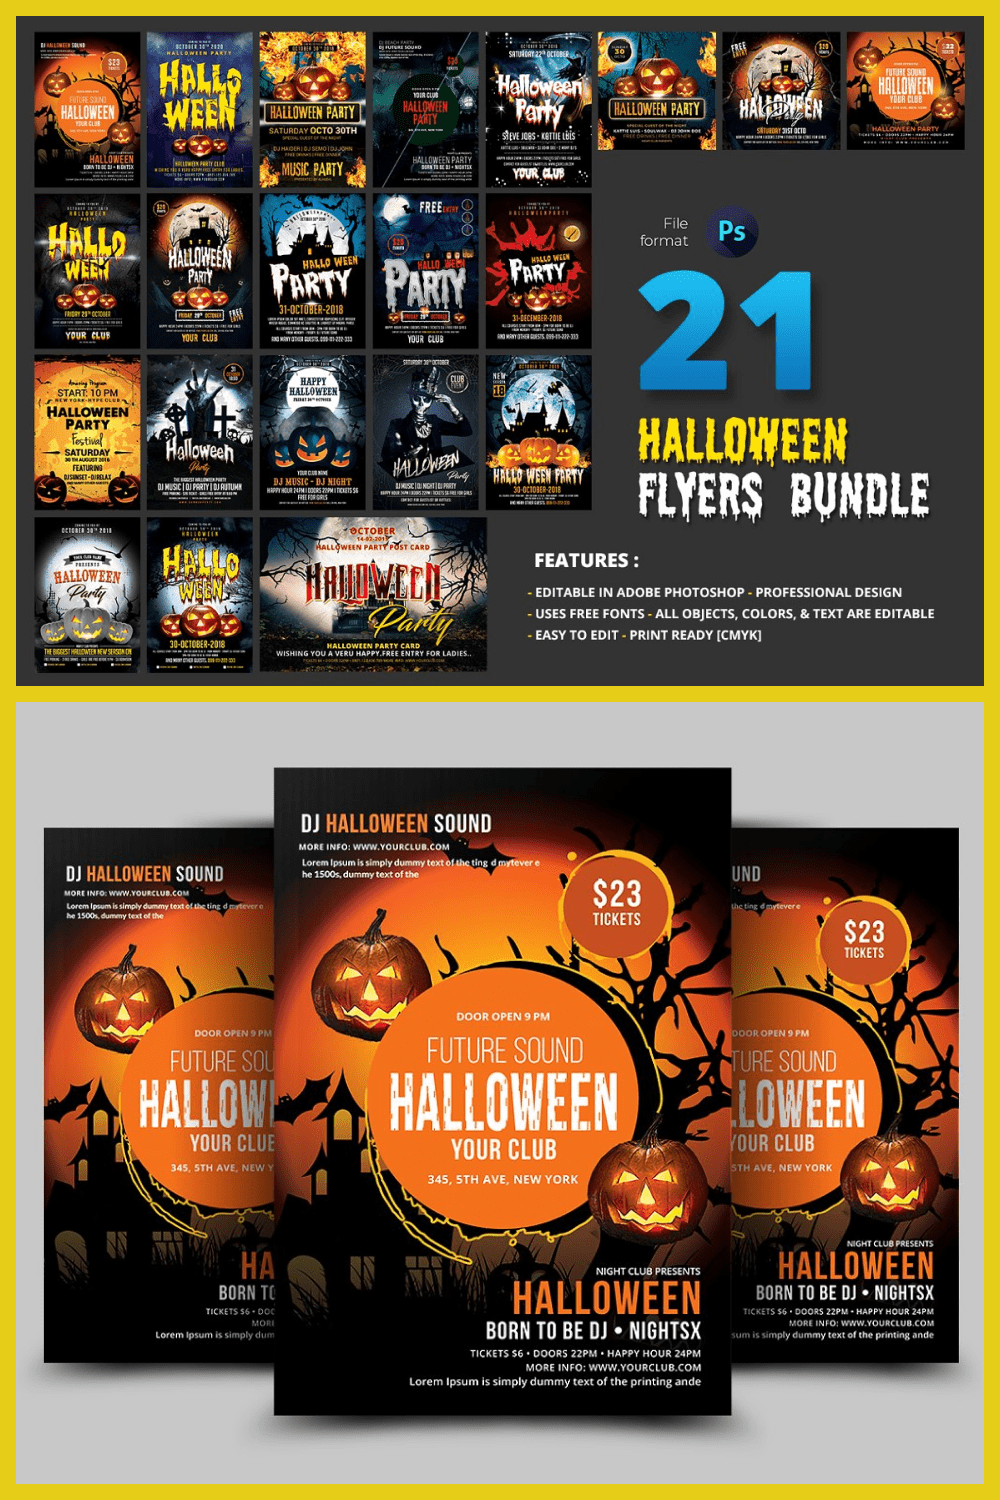 If you want to celebrate Halloween with a big cool company, then will make your invitations stylish.